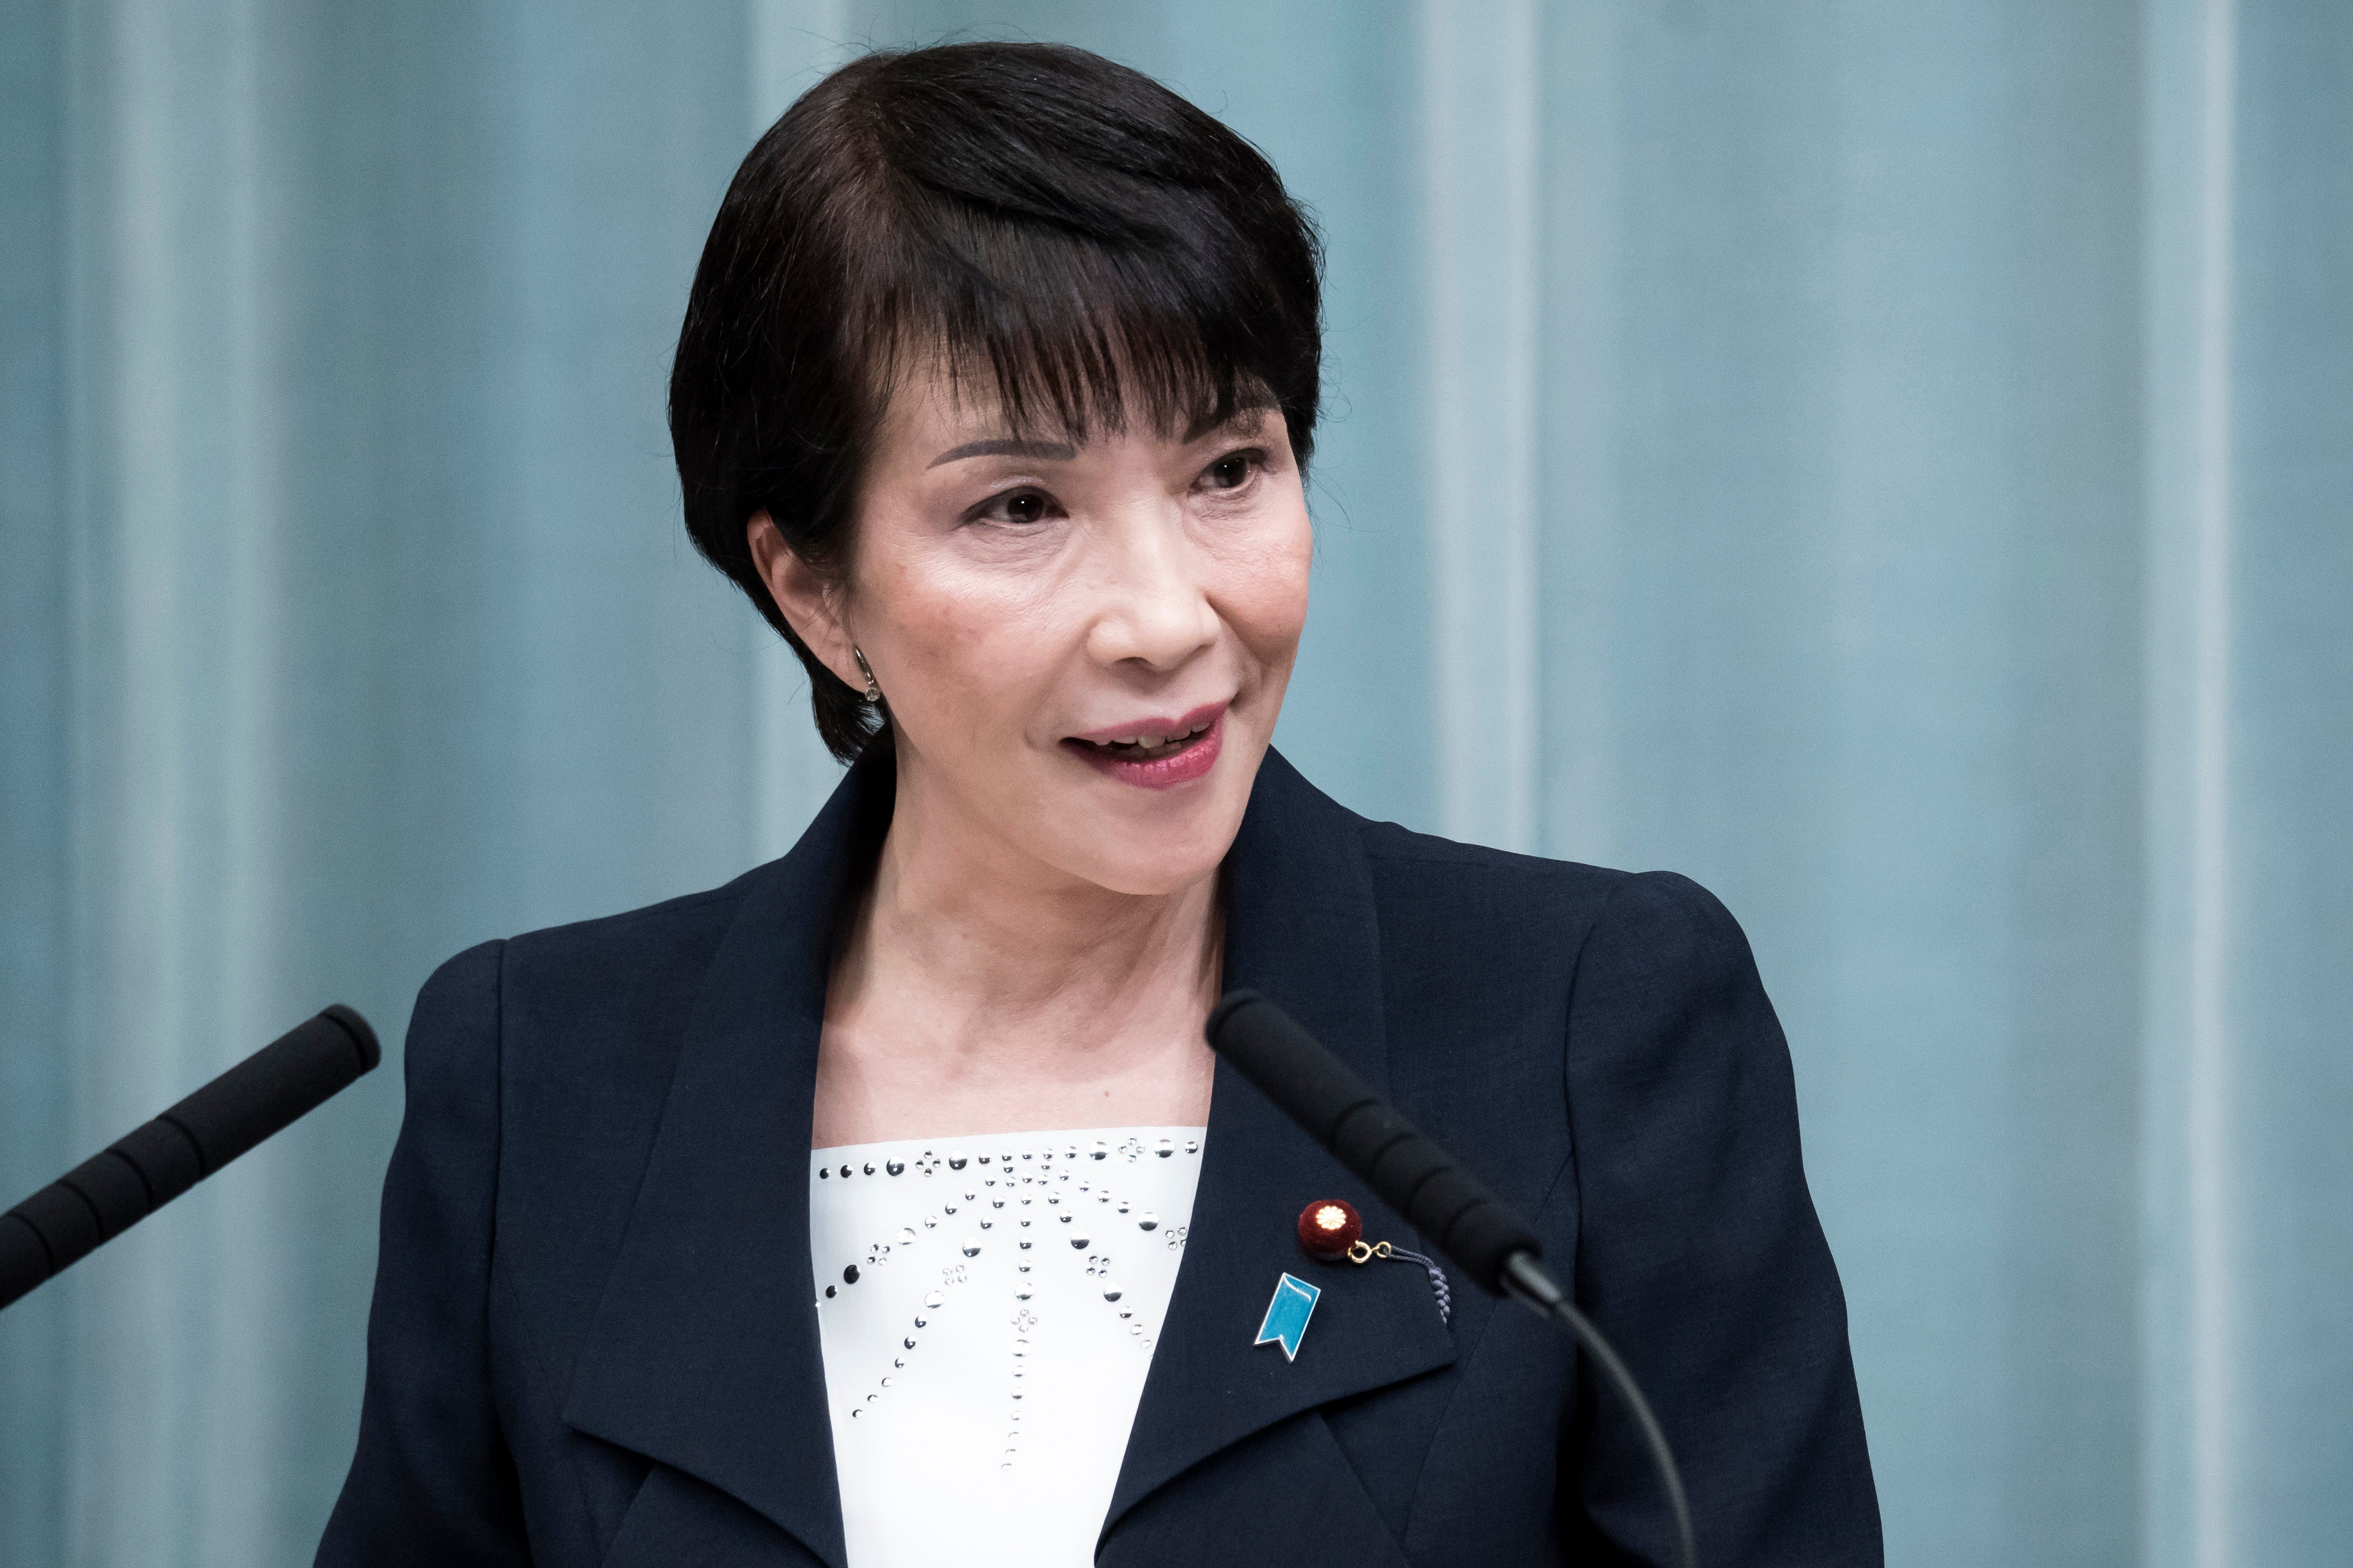 Takaichi will face stiff competition from within her own party to become leader